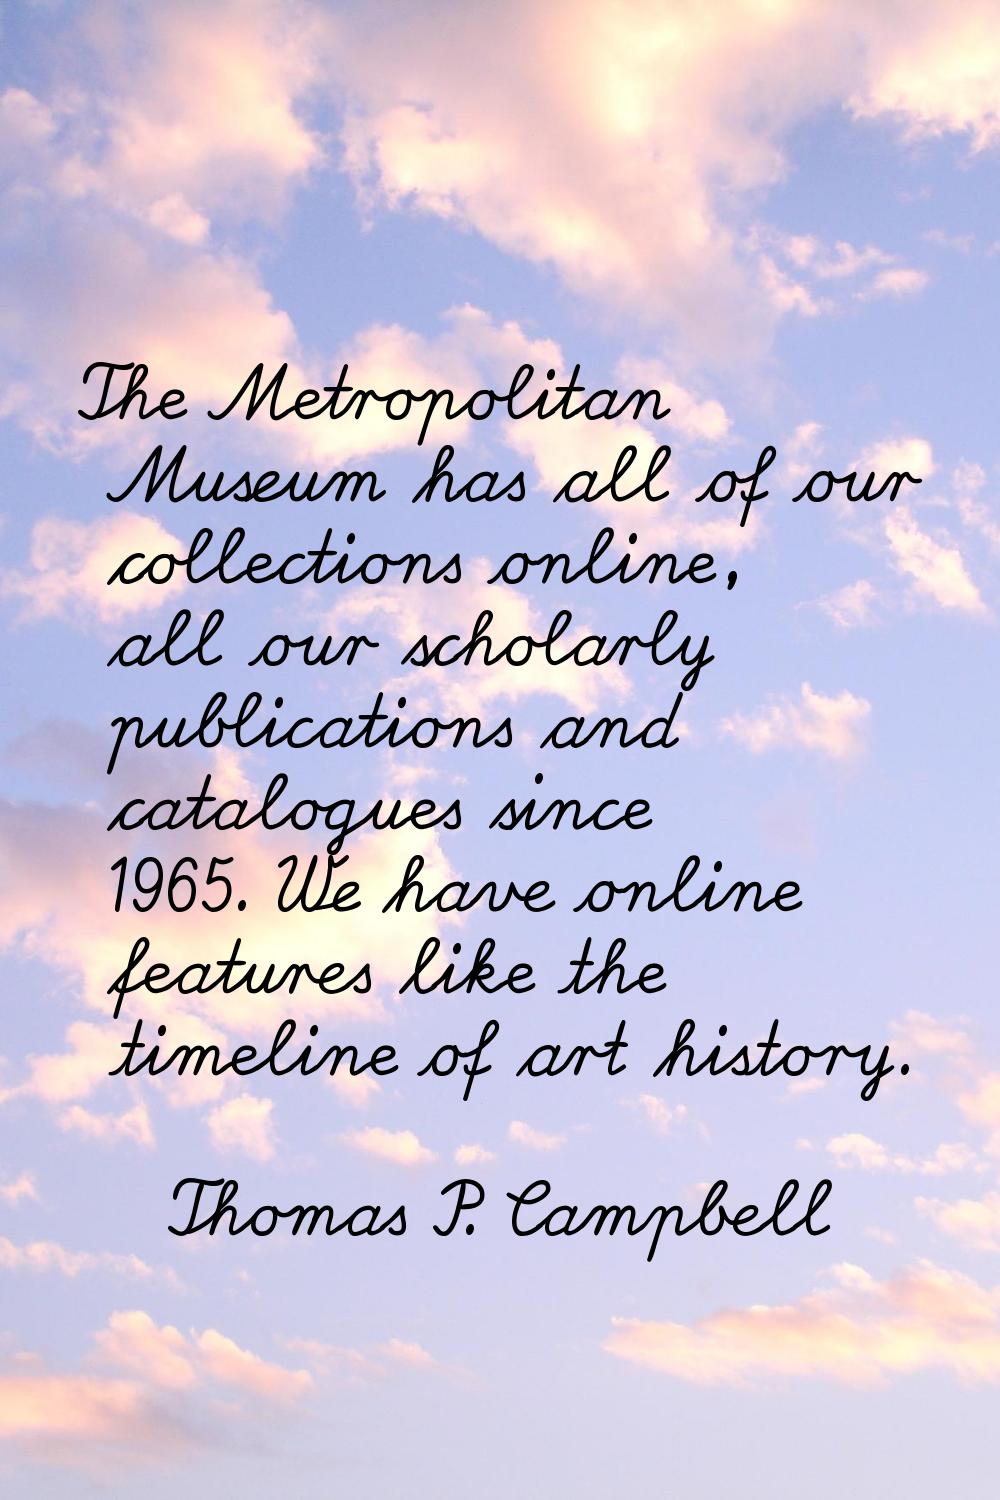 The Metropolitan Museum has all of our collections online, all our scholarly publications and catal